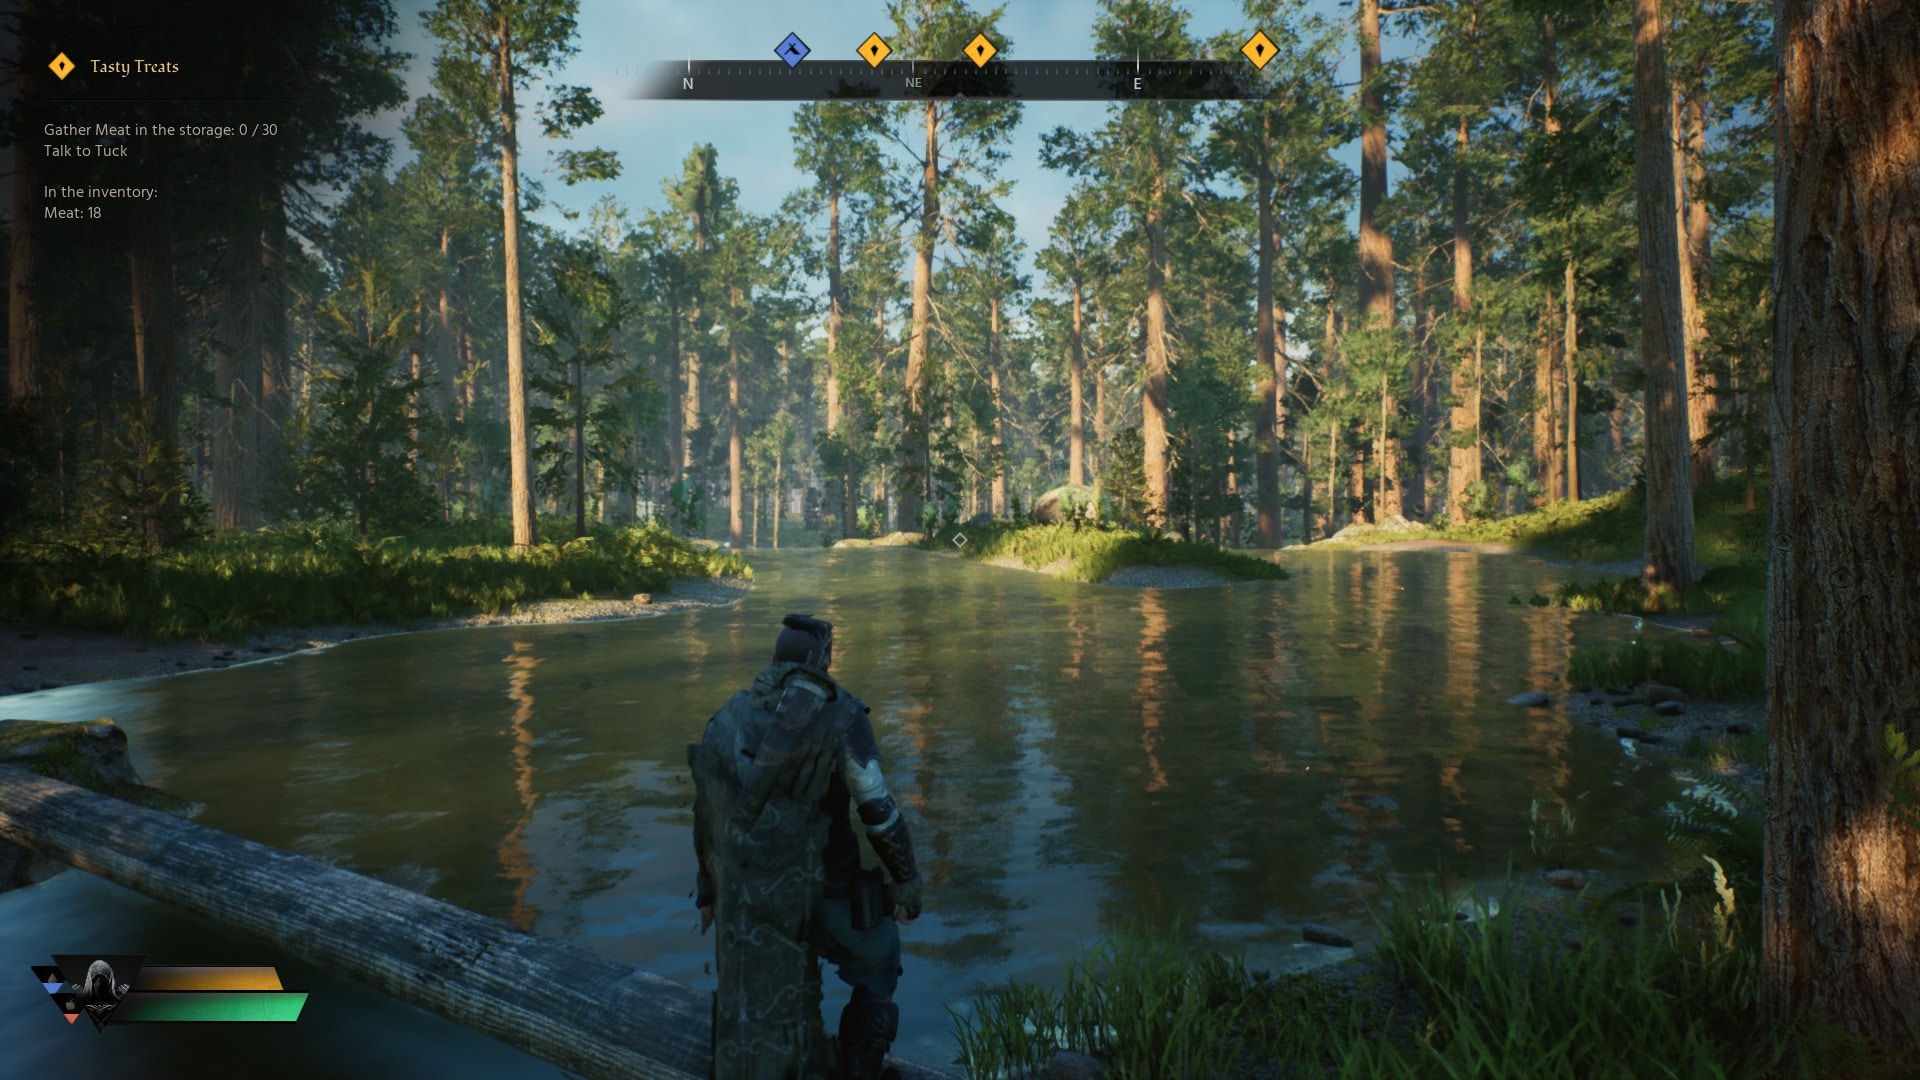 The Sherwood is a pretty spot, and thanks to a simple HUD, it's not obscured by any annoying ads.